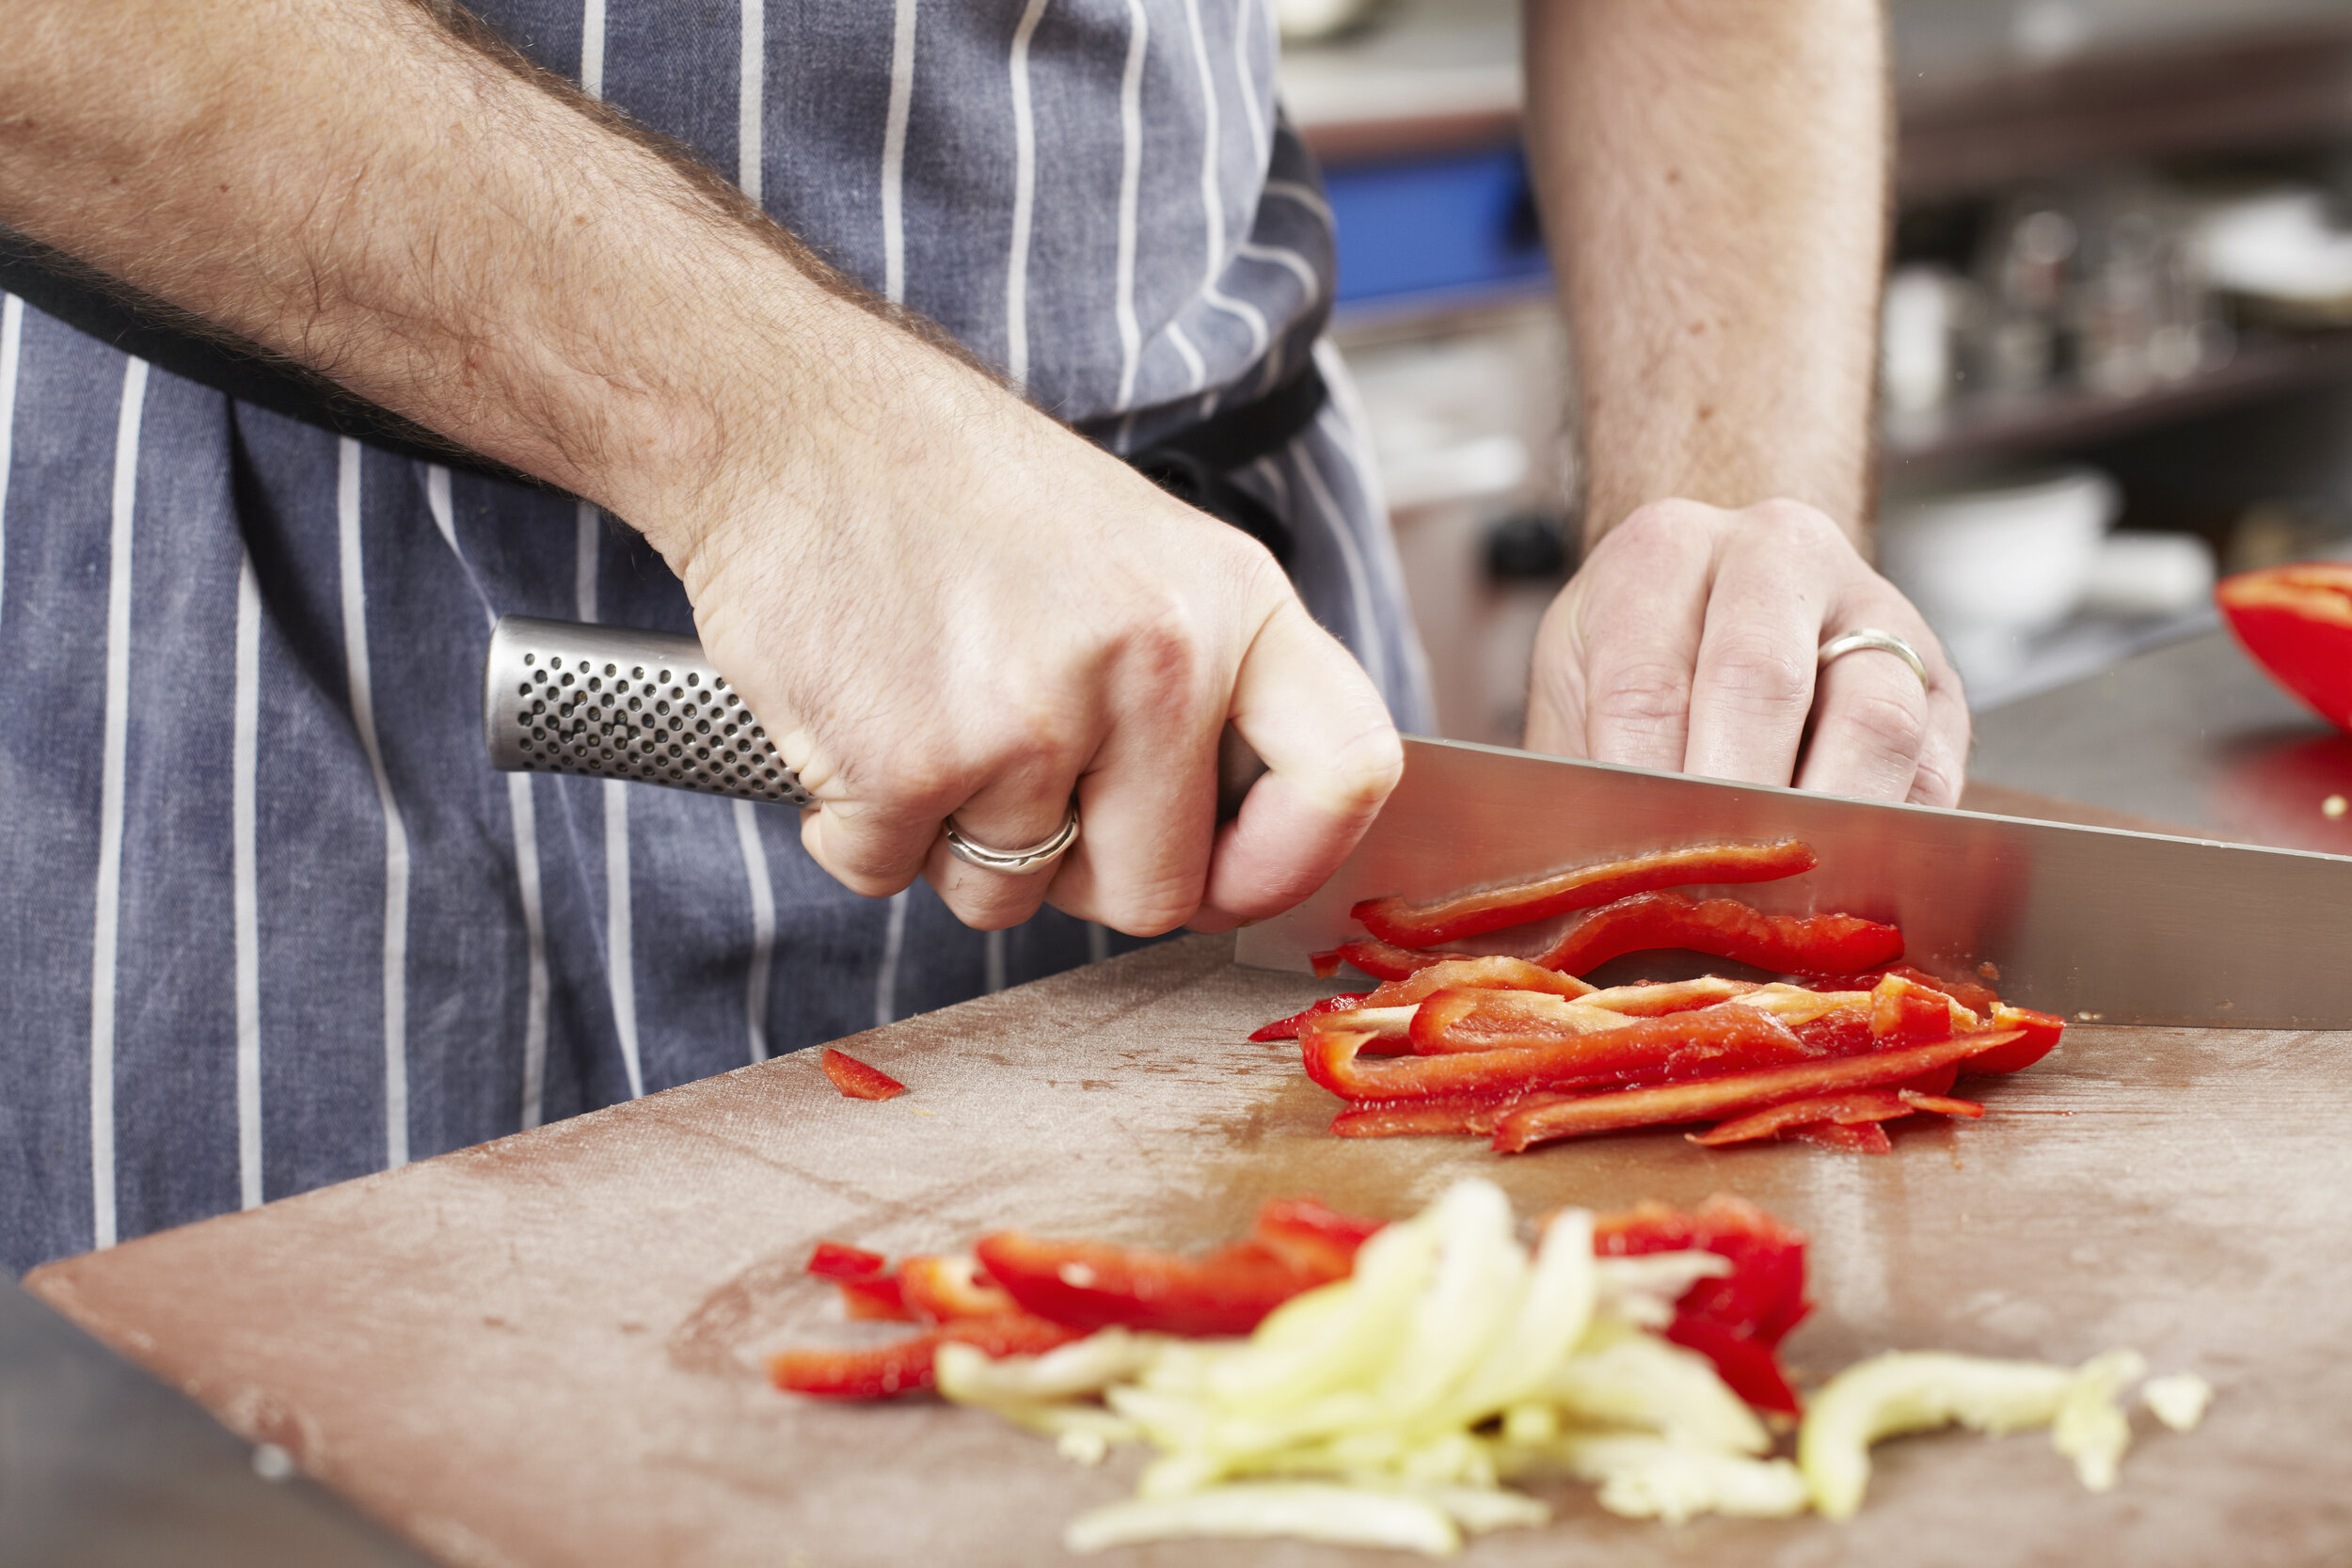 Chef-chopping-vegetables-in-kitchen-137737388_5616x3744.jpeg